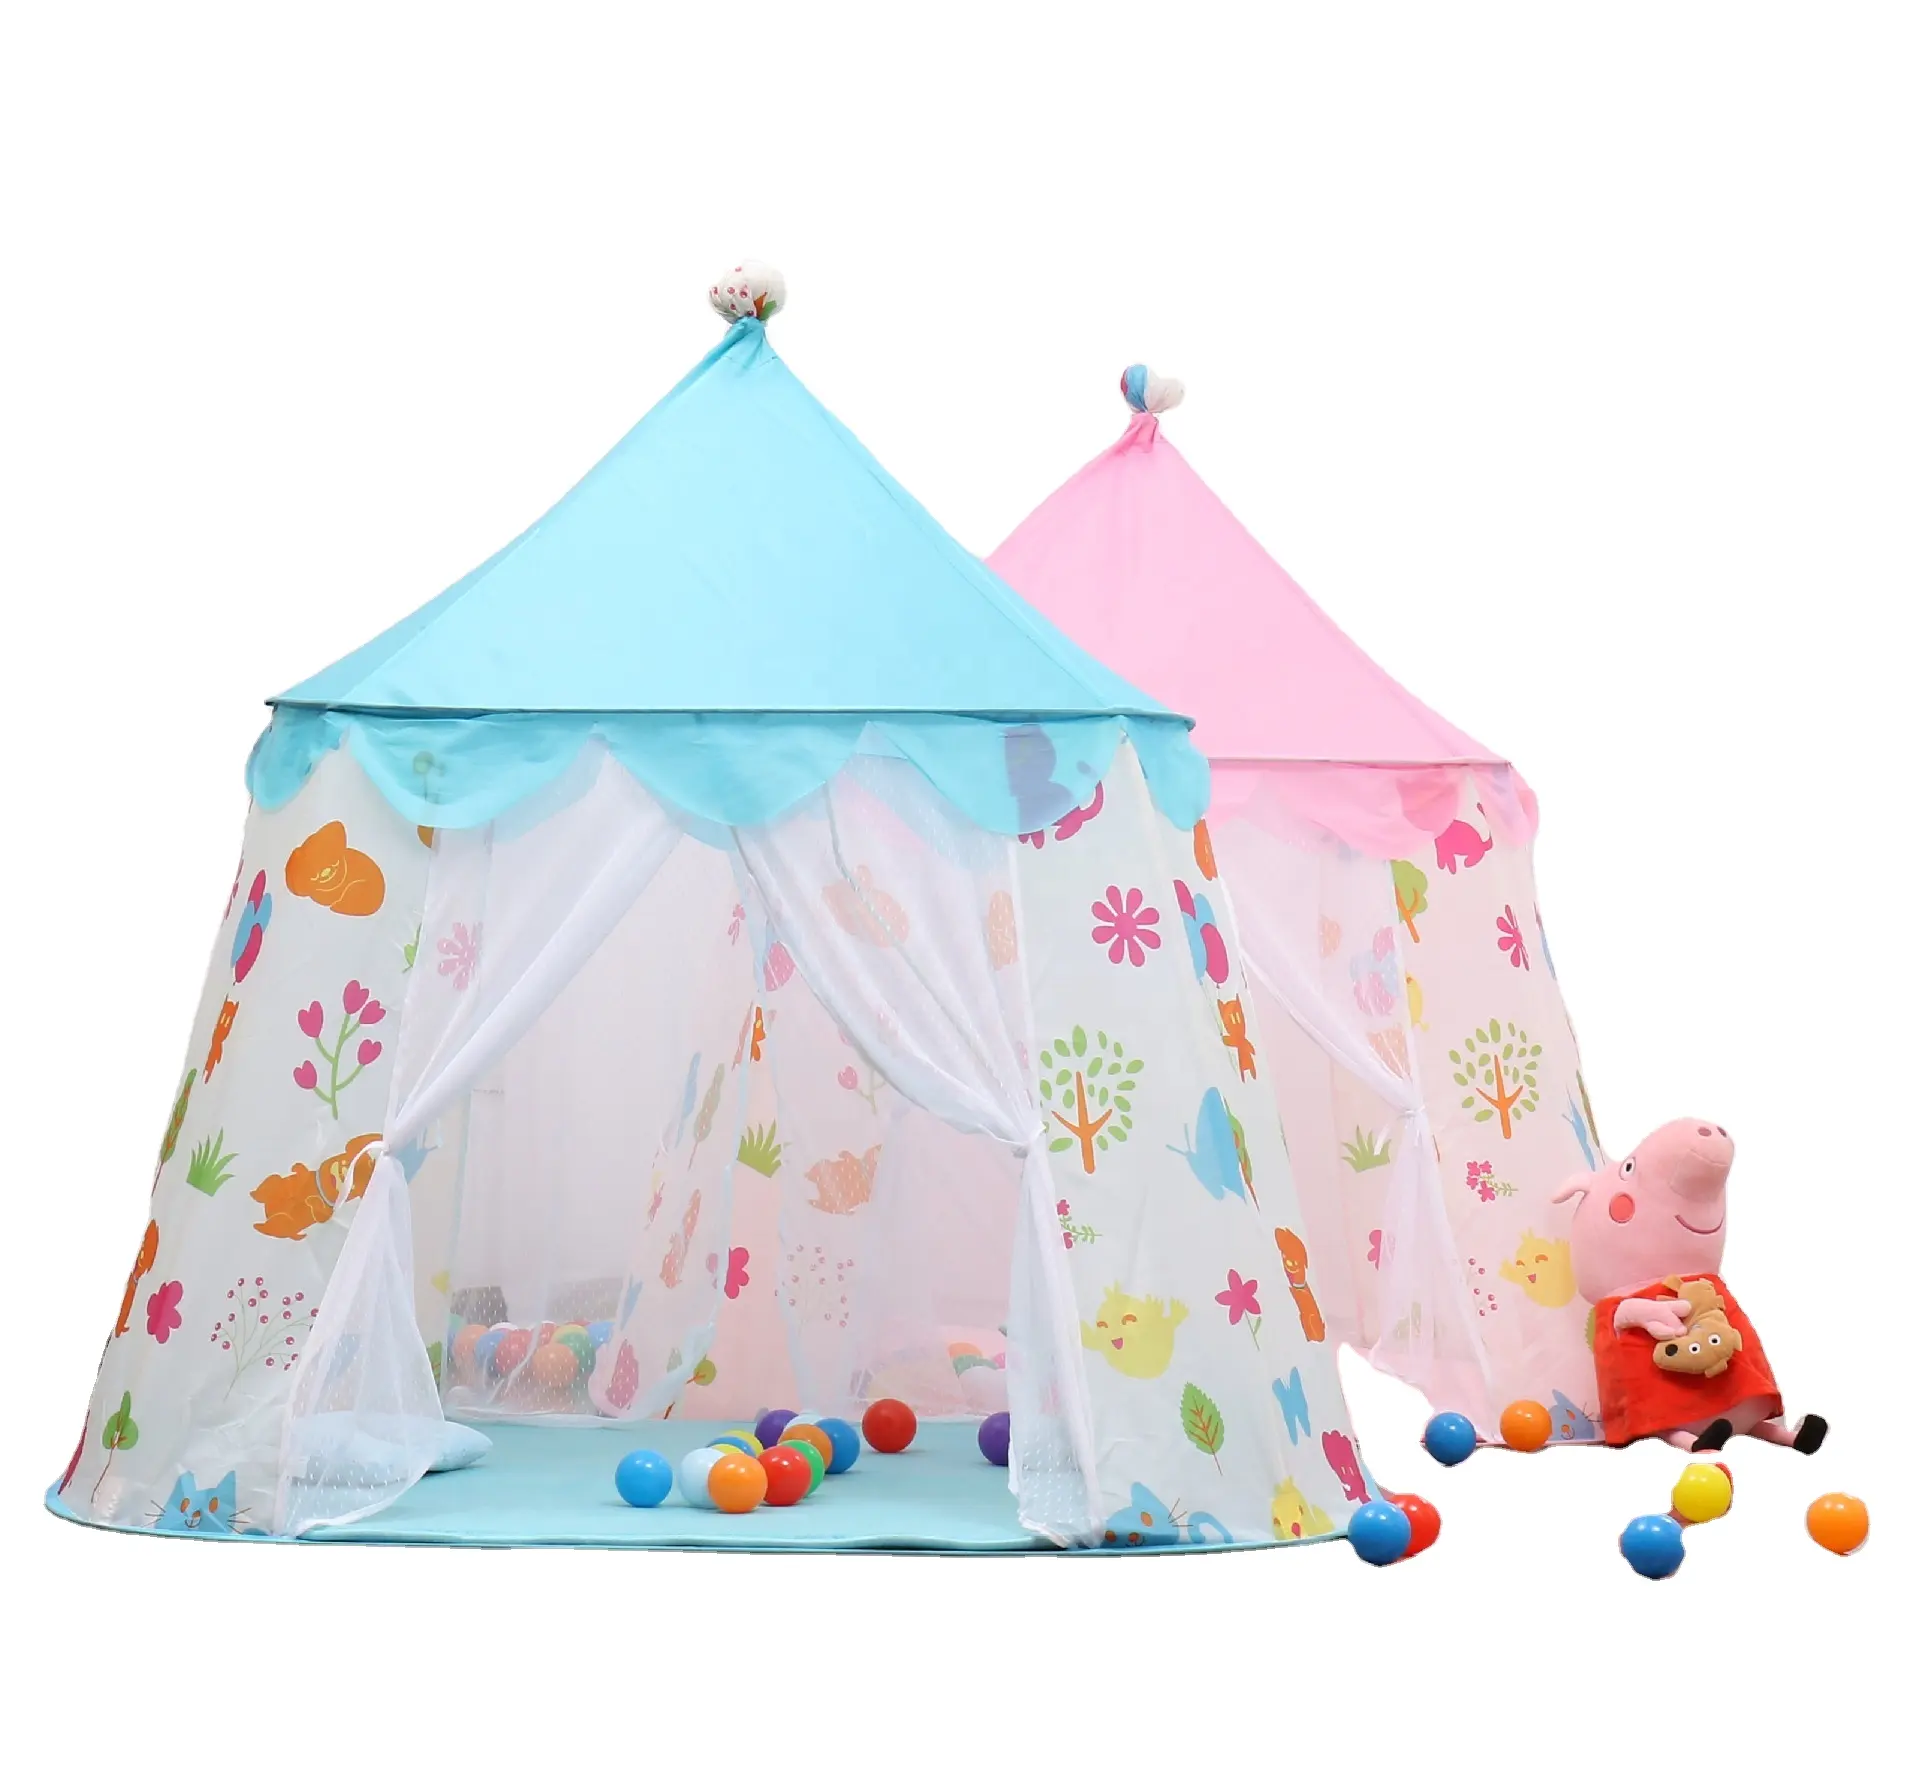 Portable PrinceTent Children Tent Party Roof To Castle Play House Kid play Toy tents Gifts Baby Playpens Toys Tent for kid